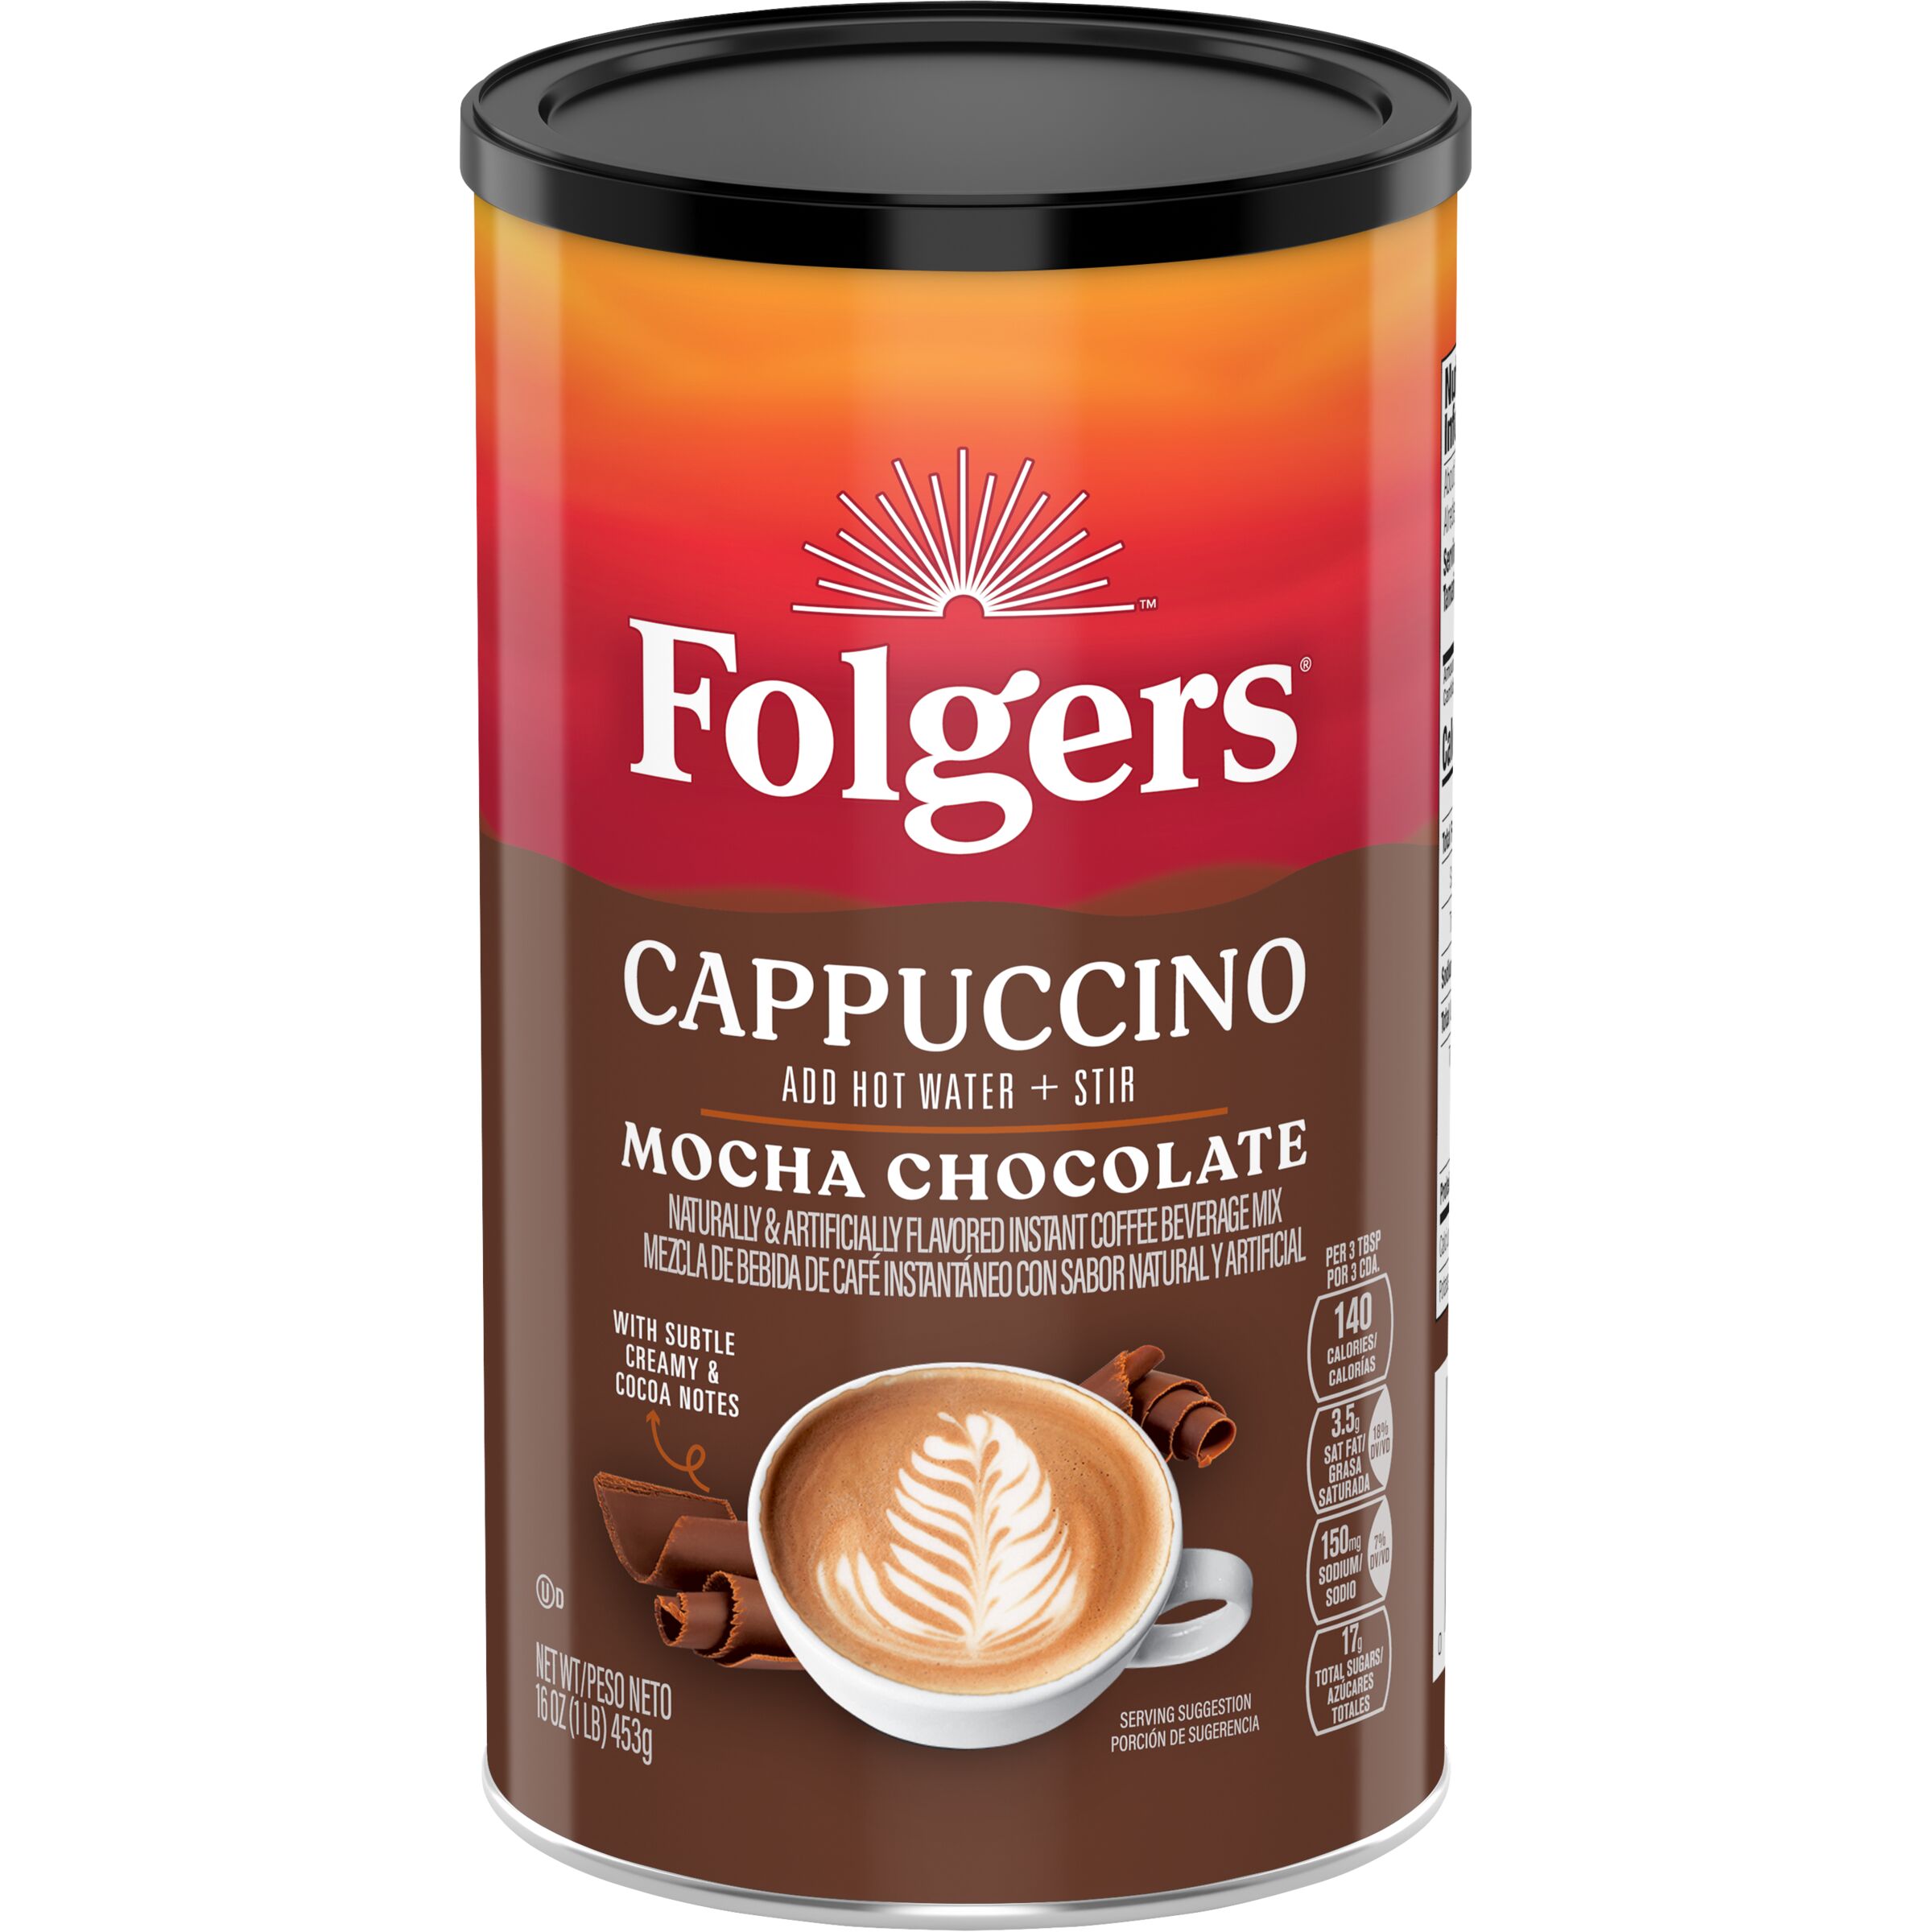 Folgers Mocha Chocolate Flavored Cappuccino Mix, Instant Coffee Beverage, 16-Ounce Canister - image 1 of 9